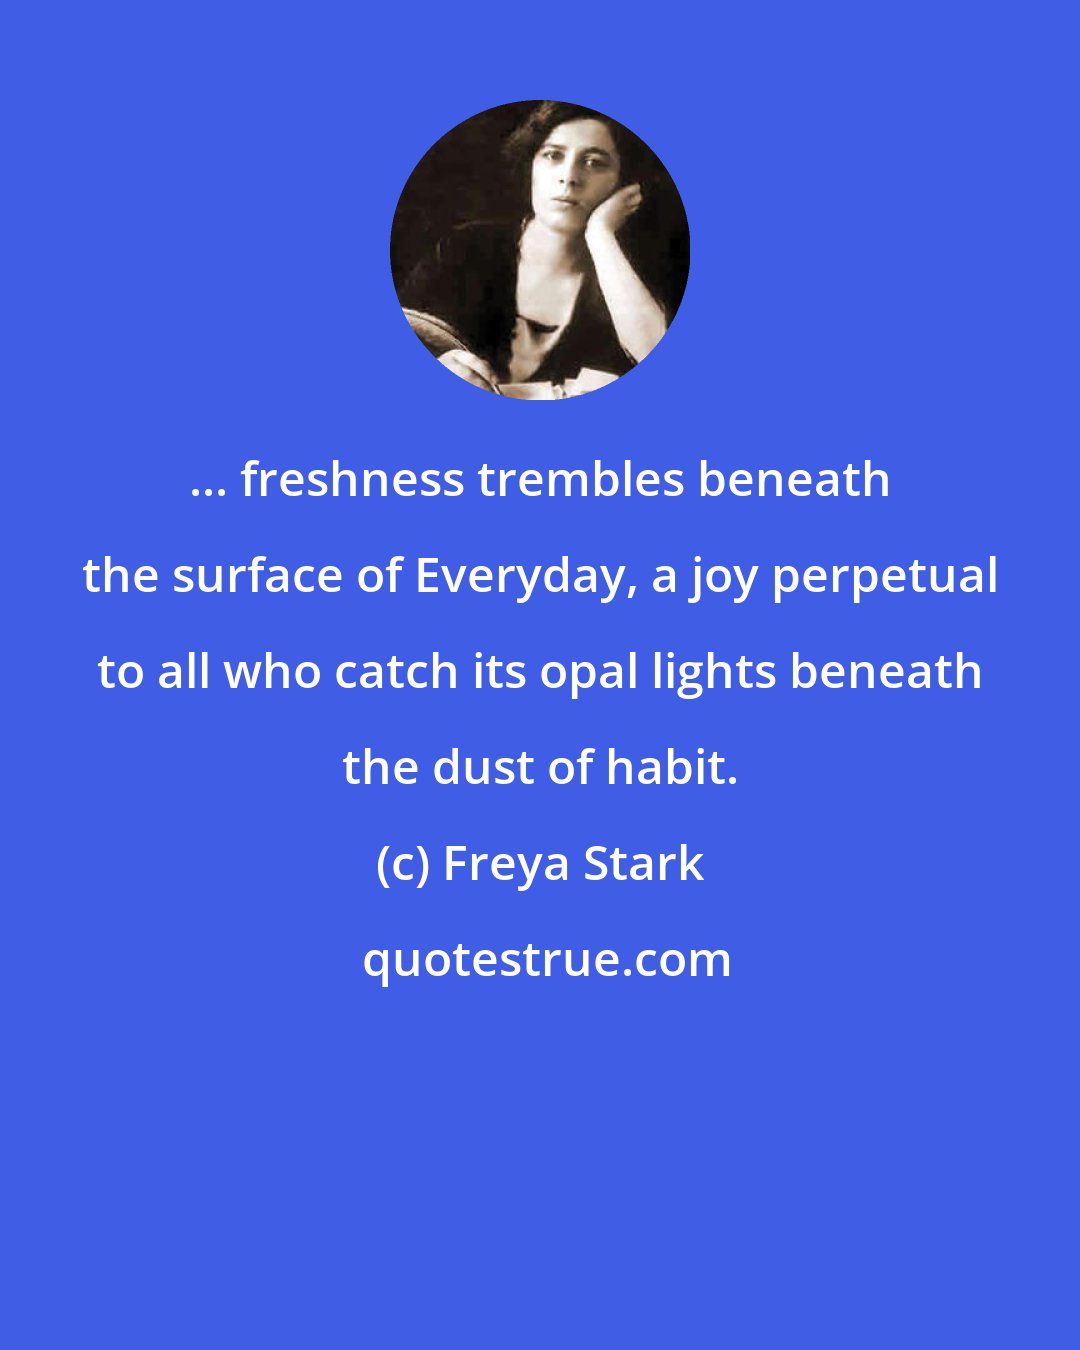 Freya Stark: ... freshness trembles beneath the surface of Everyday, a joy perpetual to all who catch its opal lights beneath the dust of habit.